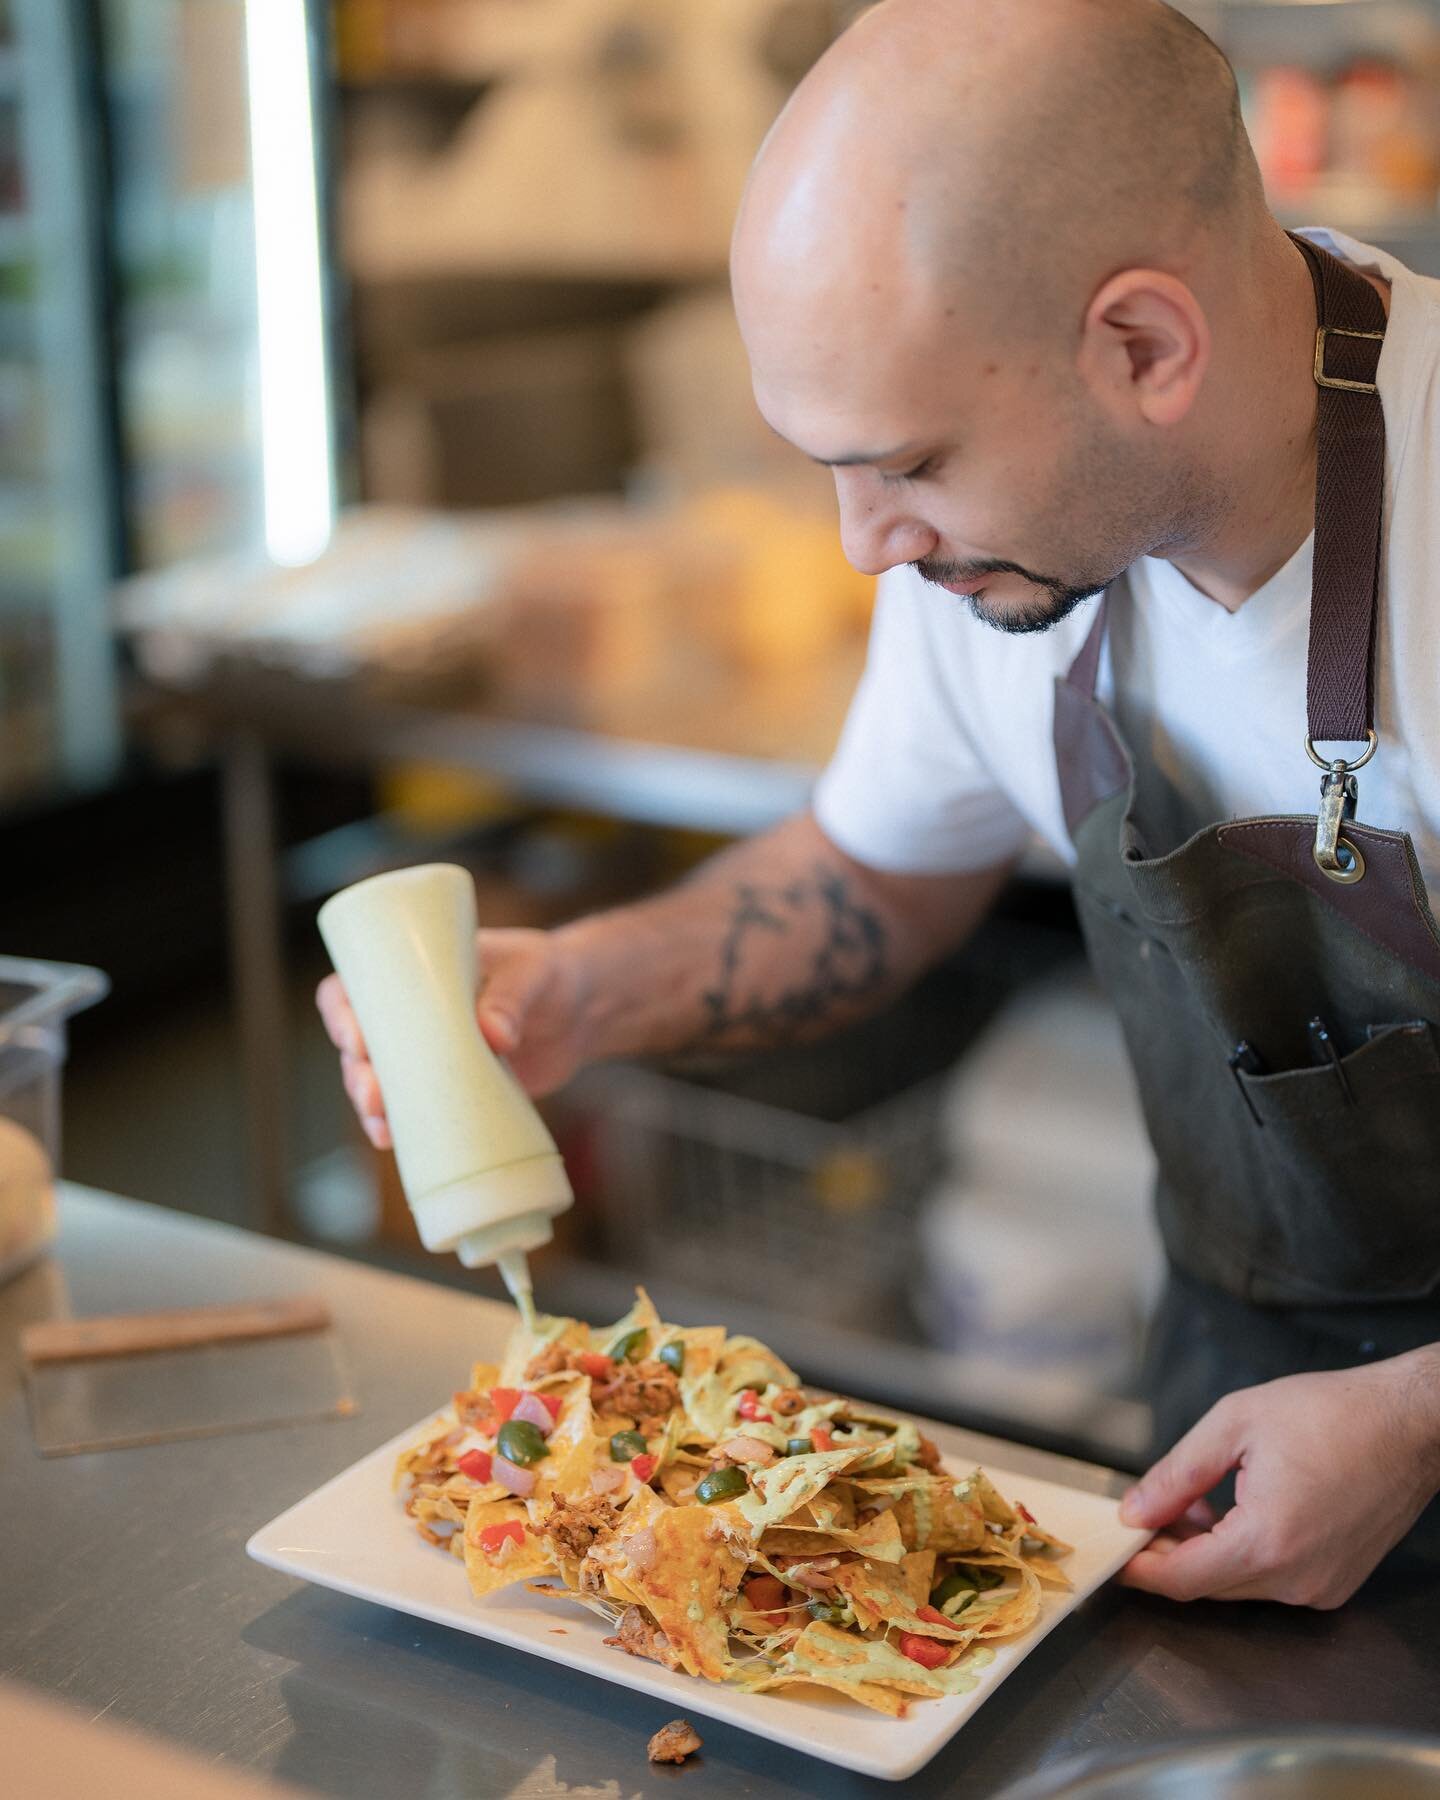 Our Kitchen Team; the unsung heros of Land &amp; Sea, slinging our famous nachos day in and day out. 
.
Shout out to Evan &amp; team for doing such an amazing job. If you haven&rsquo;t had our food, you really should. 
.
#breweryfood #nachos #landand